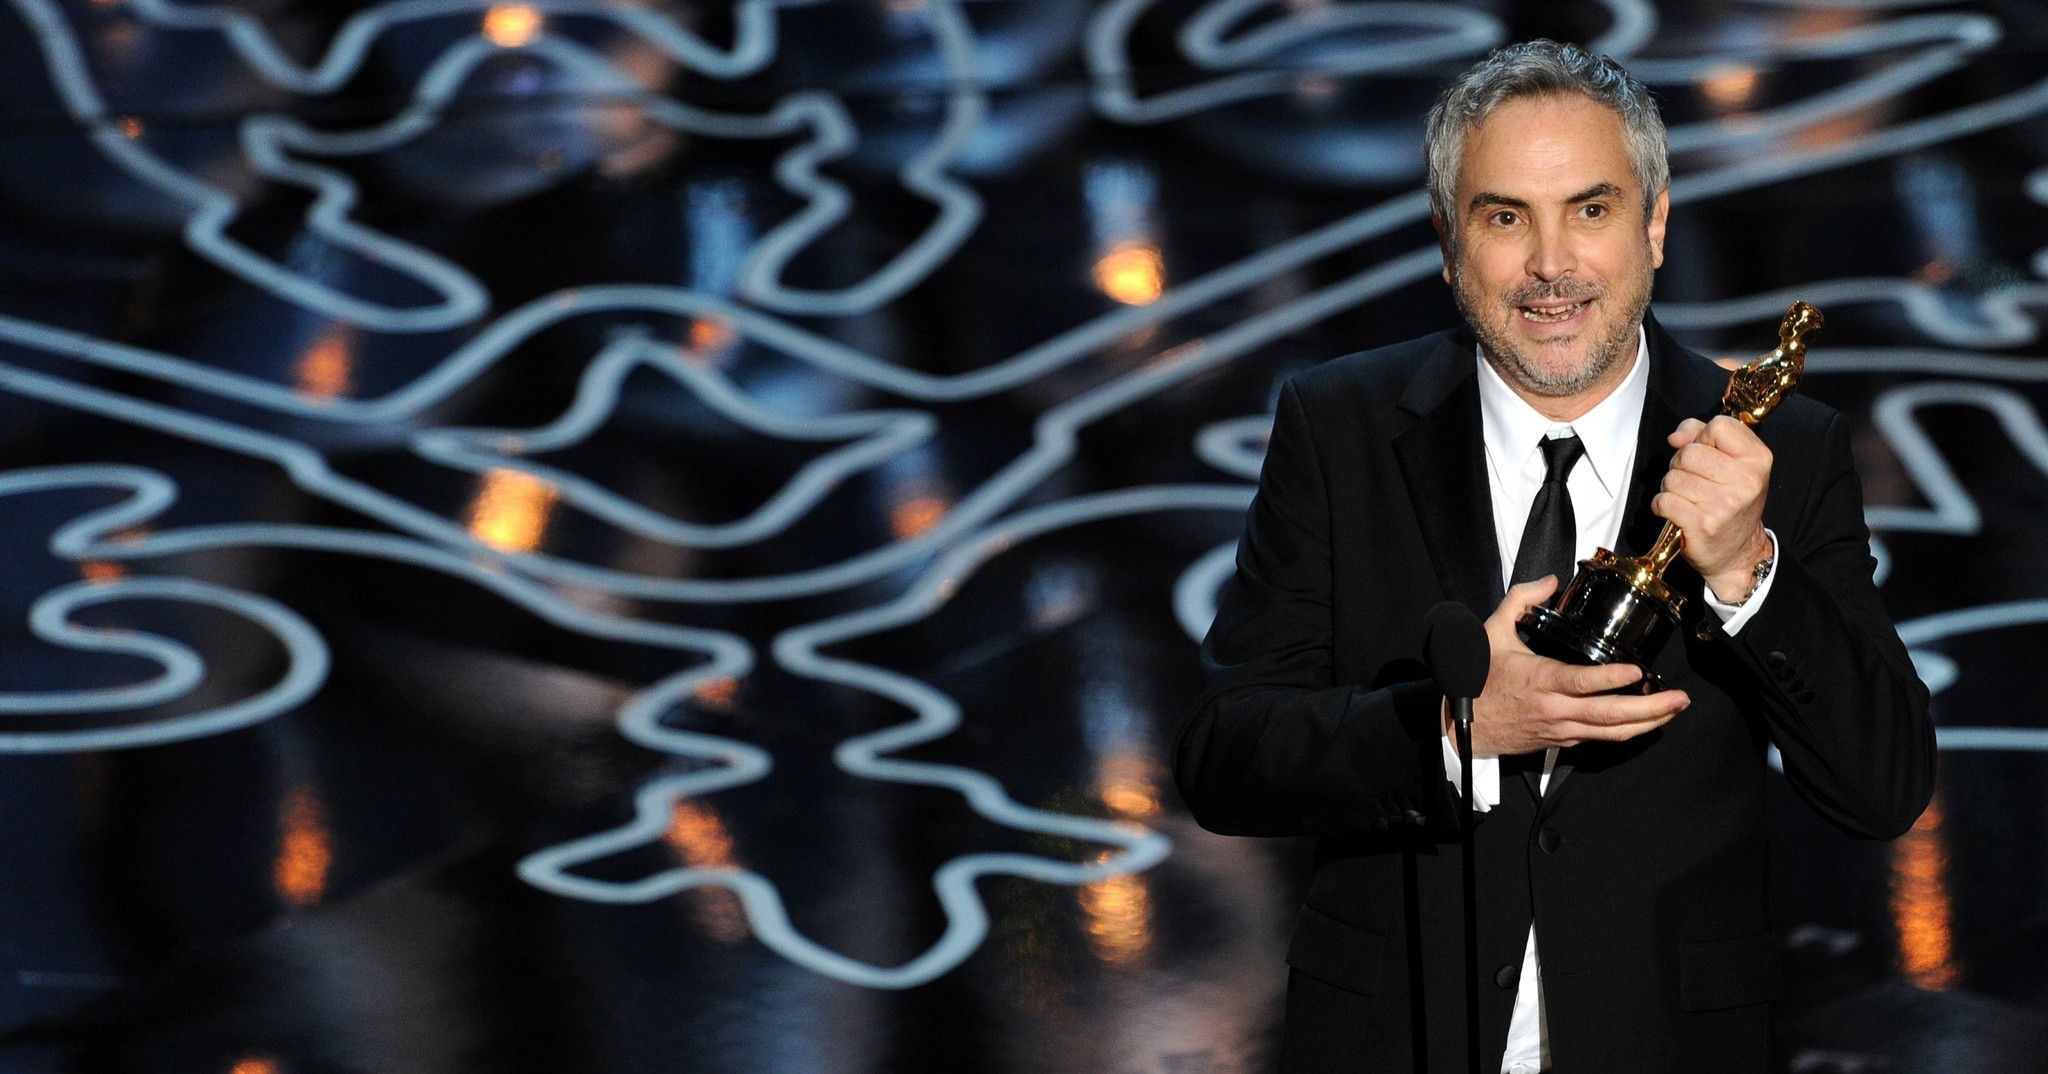 Alfonso Cuaron with his Best Director Oscar for Gravity